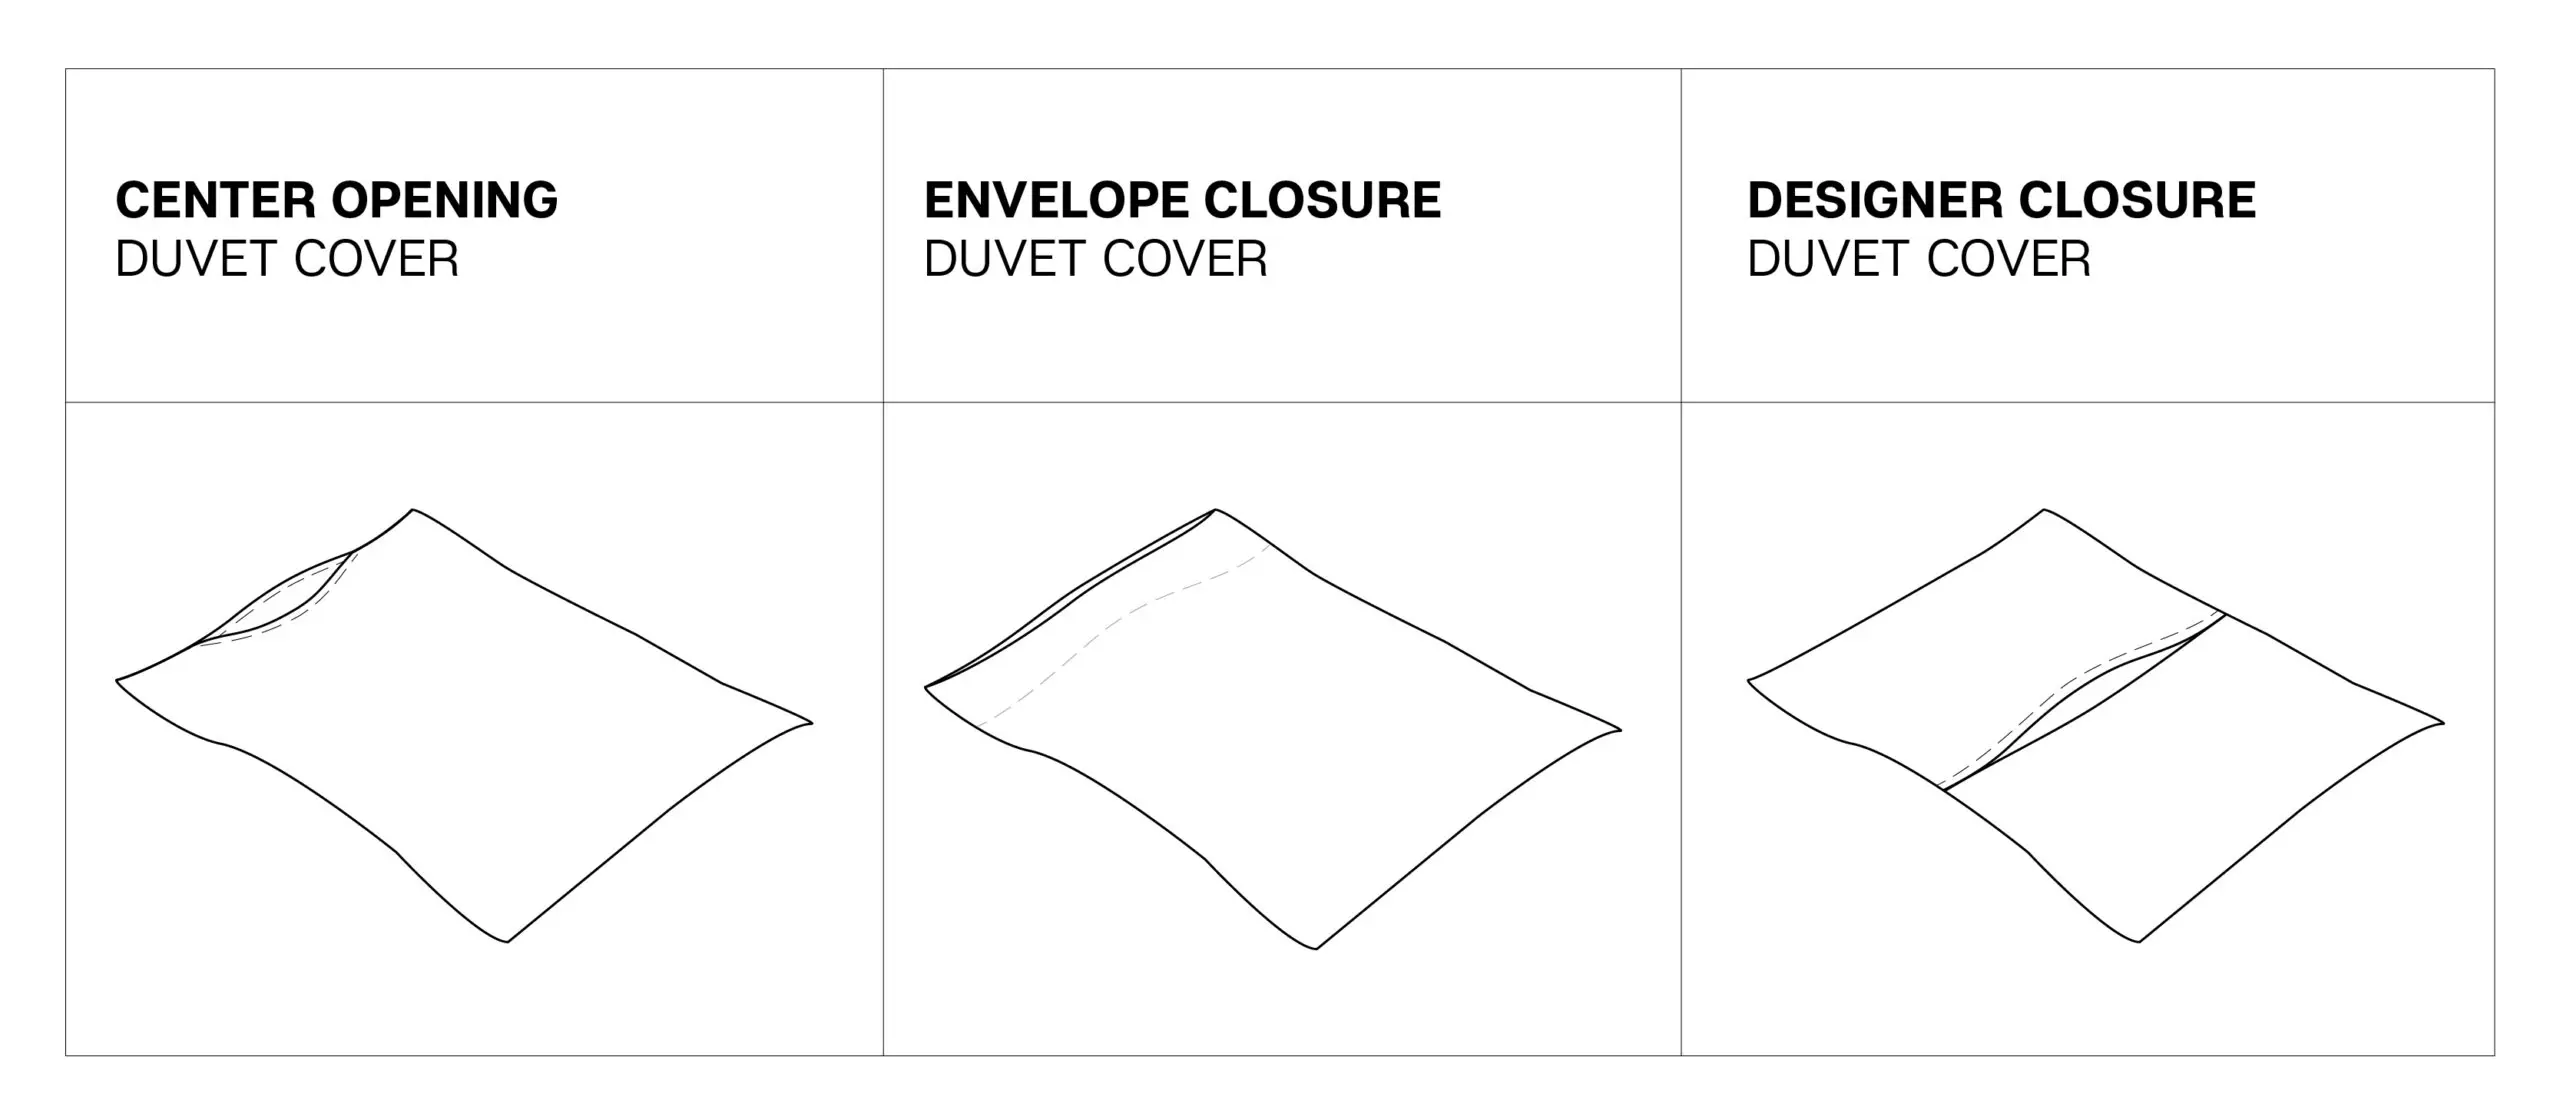 A side-by-side comparison of the various duvet cover closure options available.